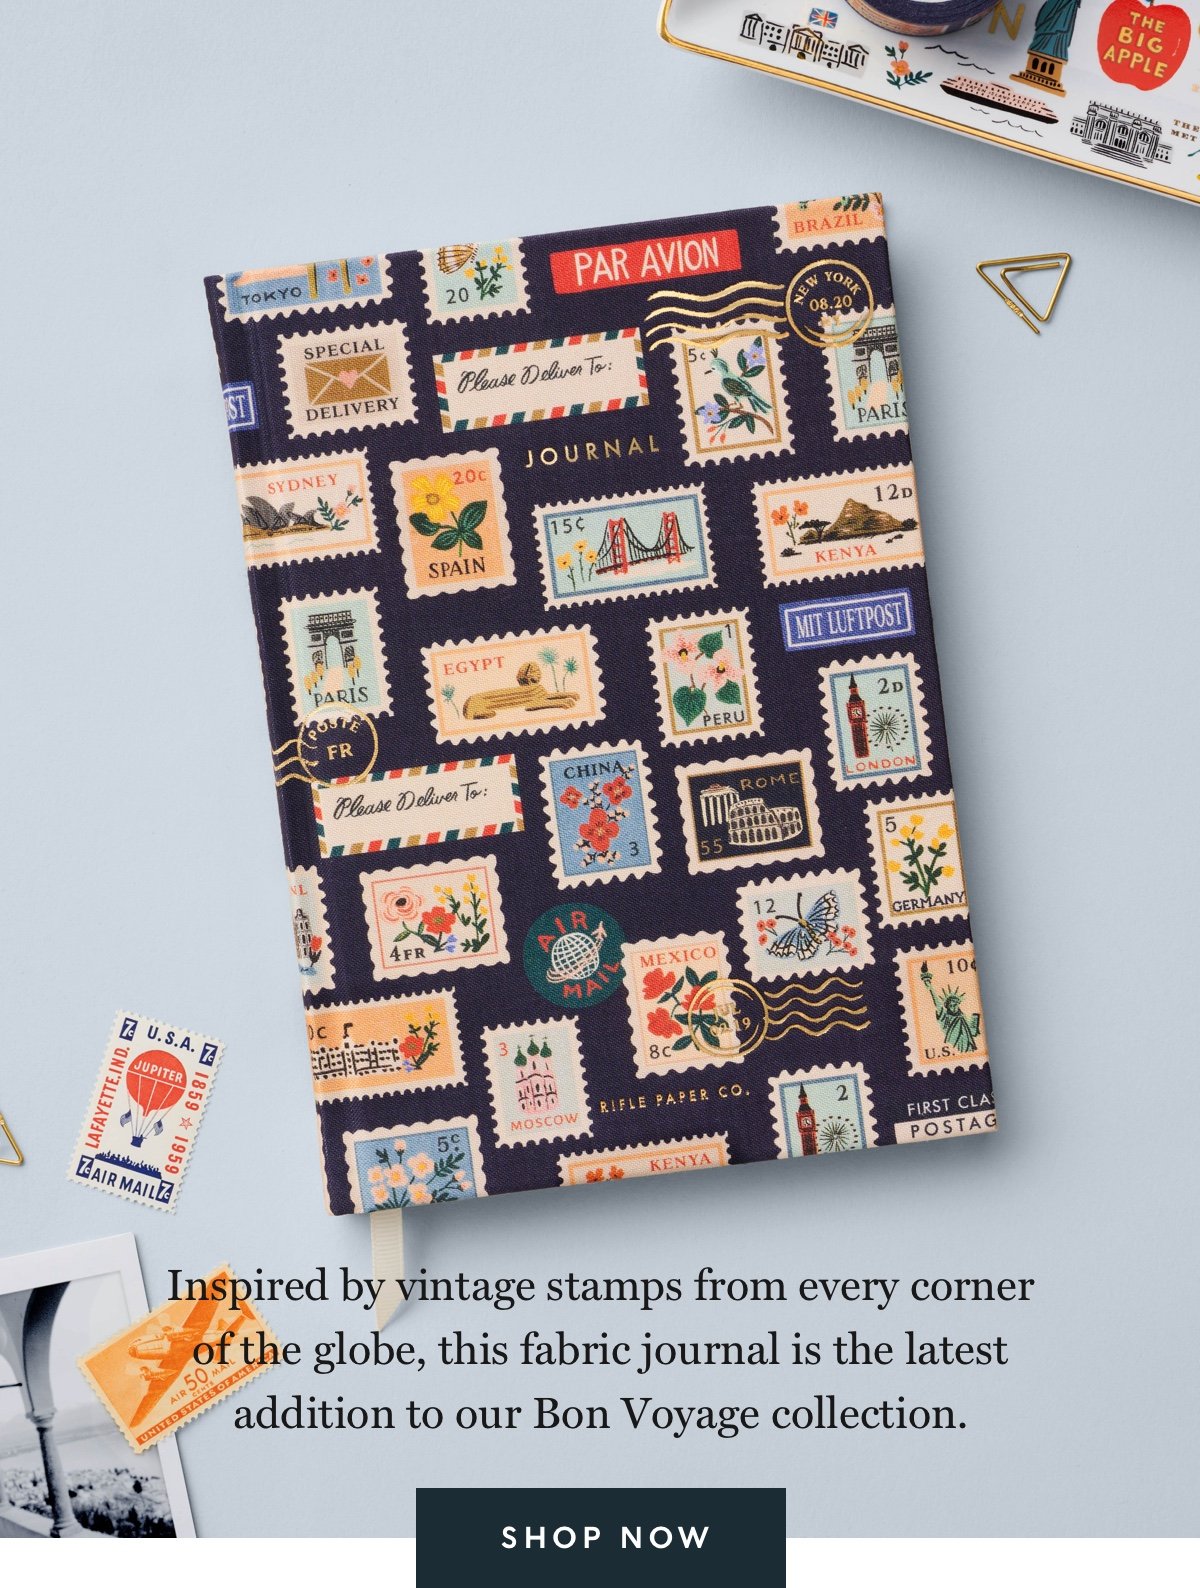 Inspired by vintage stamps from every corner of the globe, this fabric journal is the latest addition to our Bon Voyage collection.